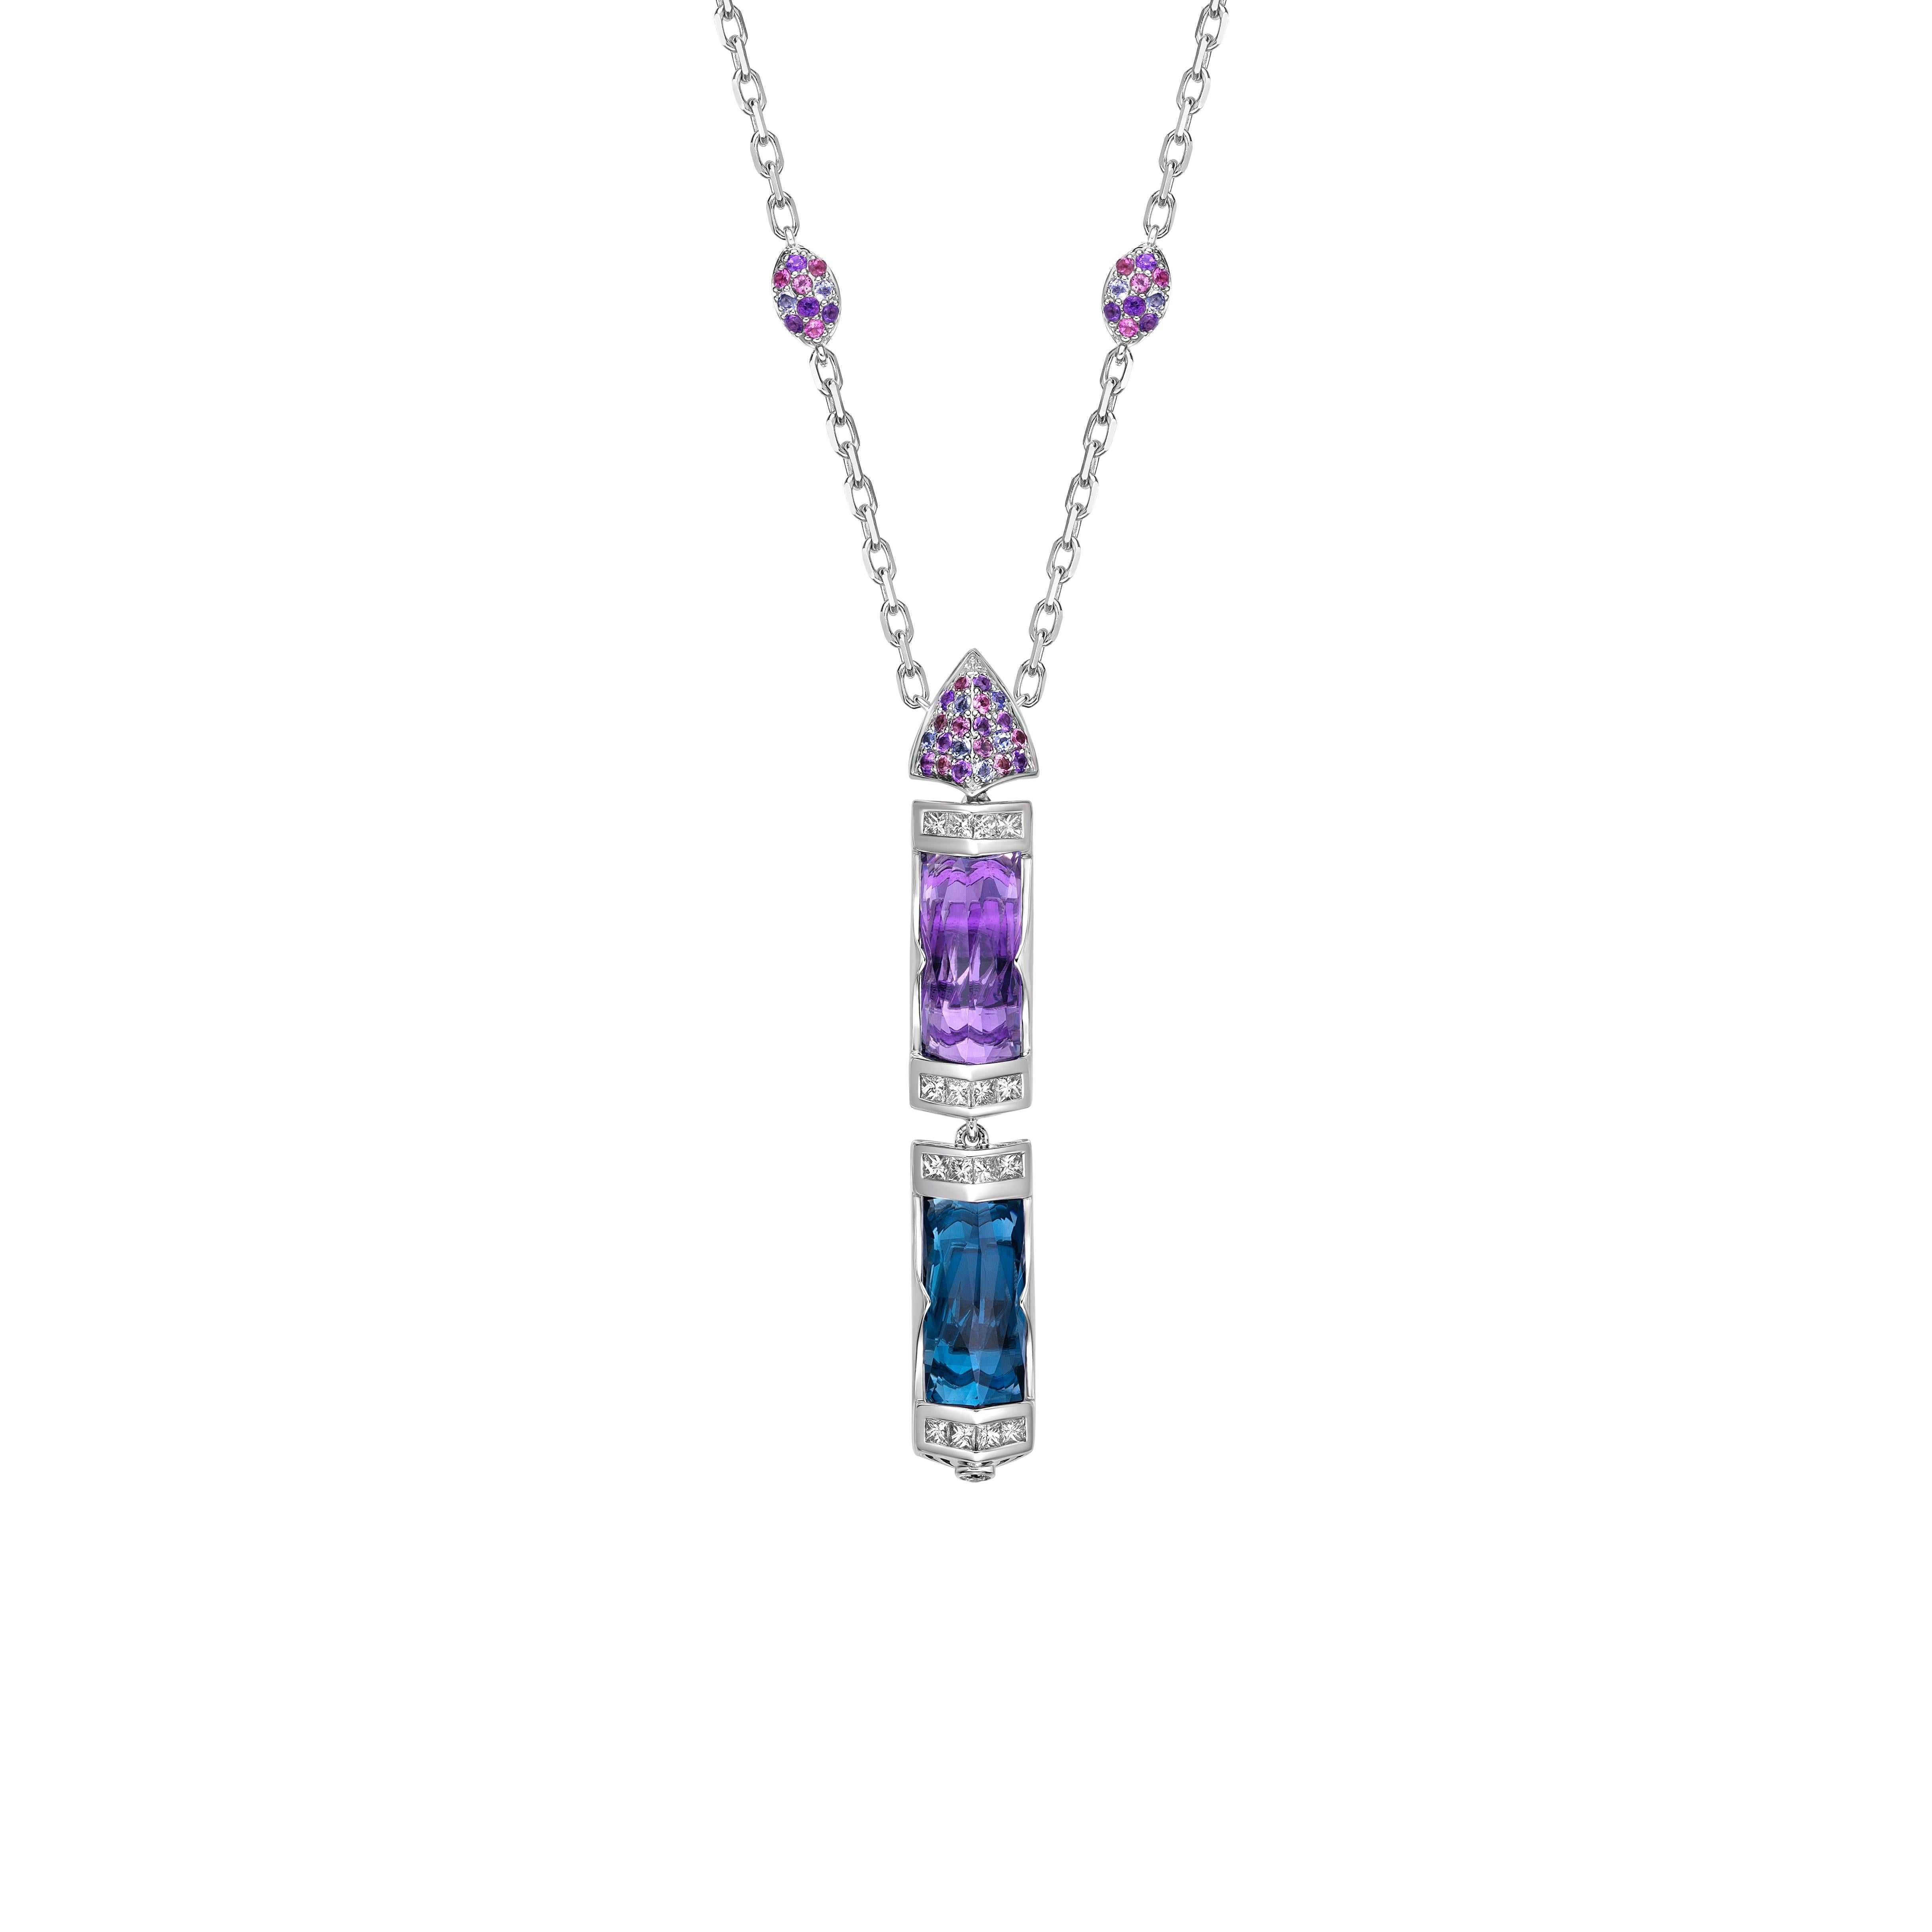 Presented A lovely Pendant of amethyst and London blue topaz is perfect for people who want to wear it to any occasion or celebration. Pink tourmaline and tanzanite embellishments on Top add to the pendant artistic and beautiful design. Crafted in